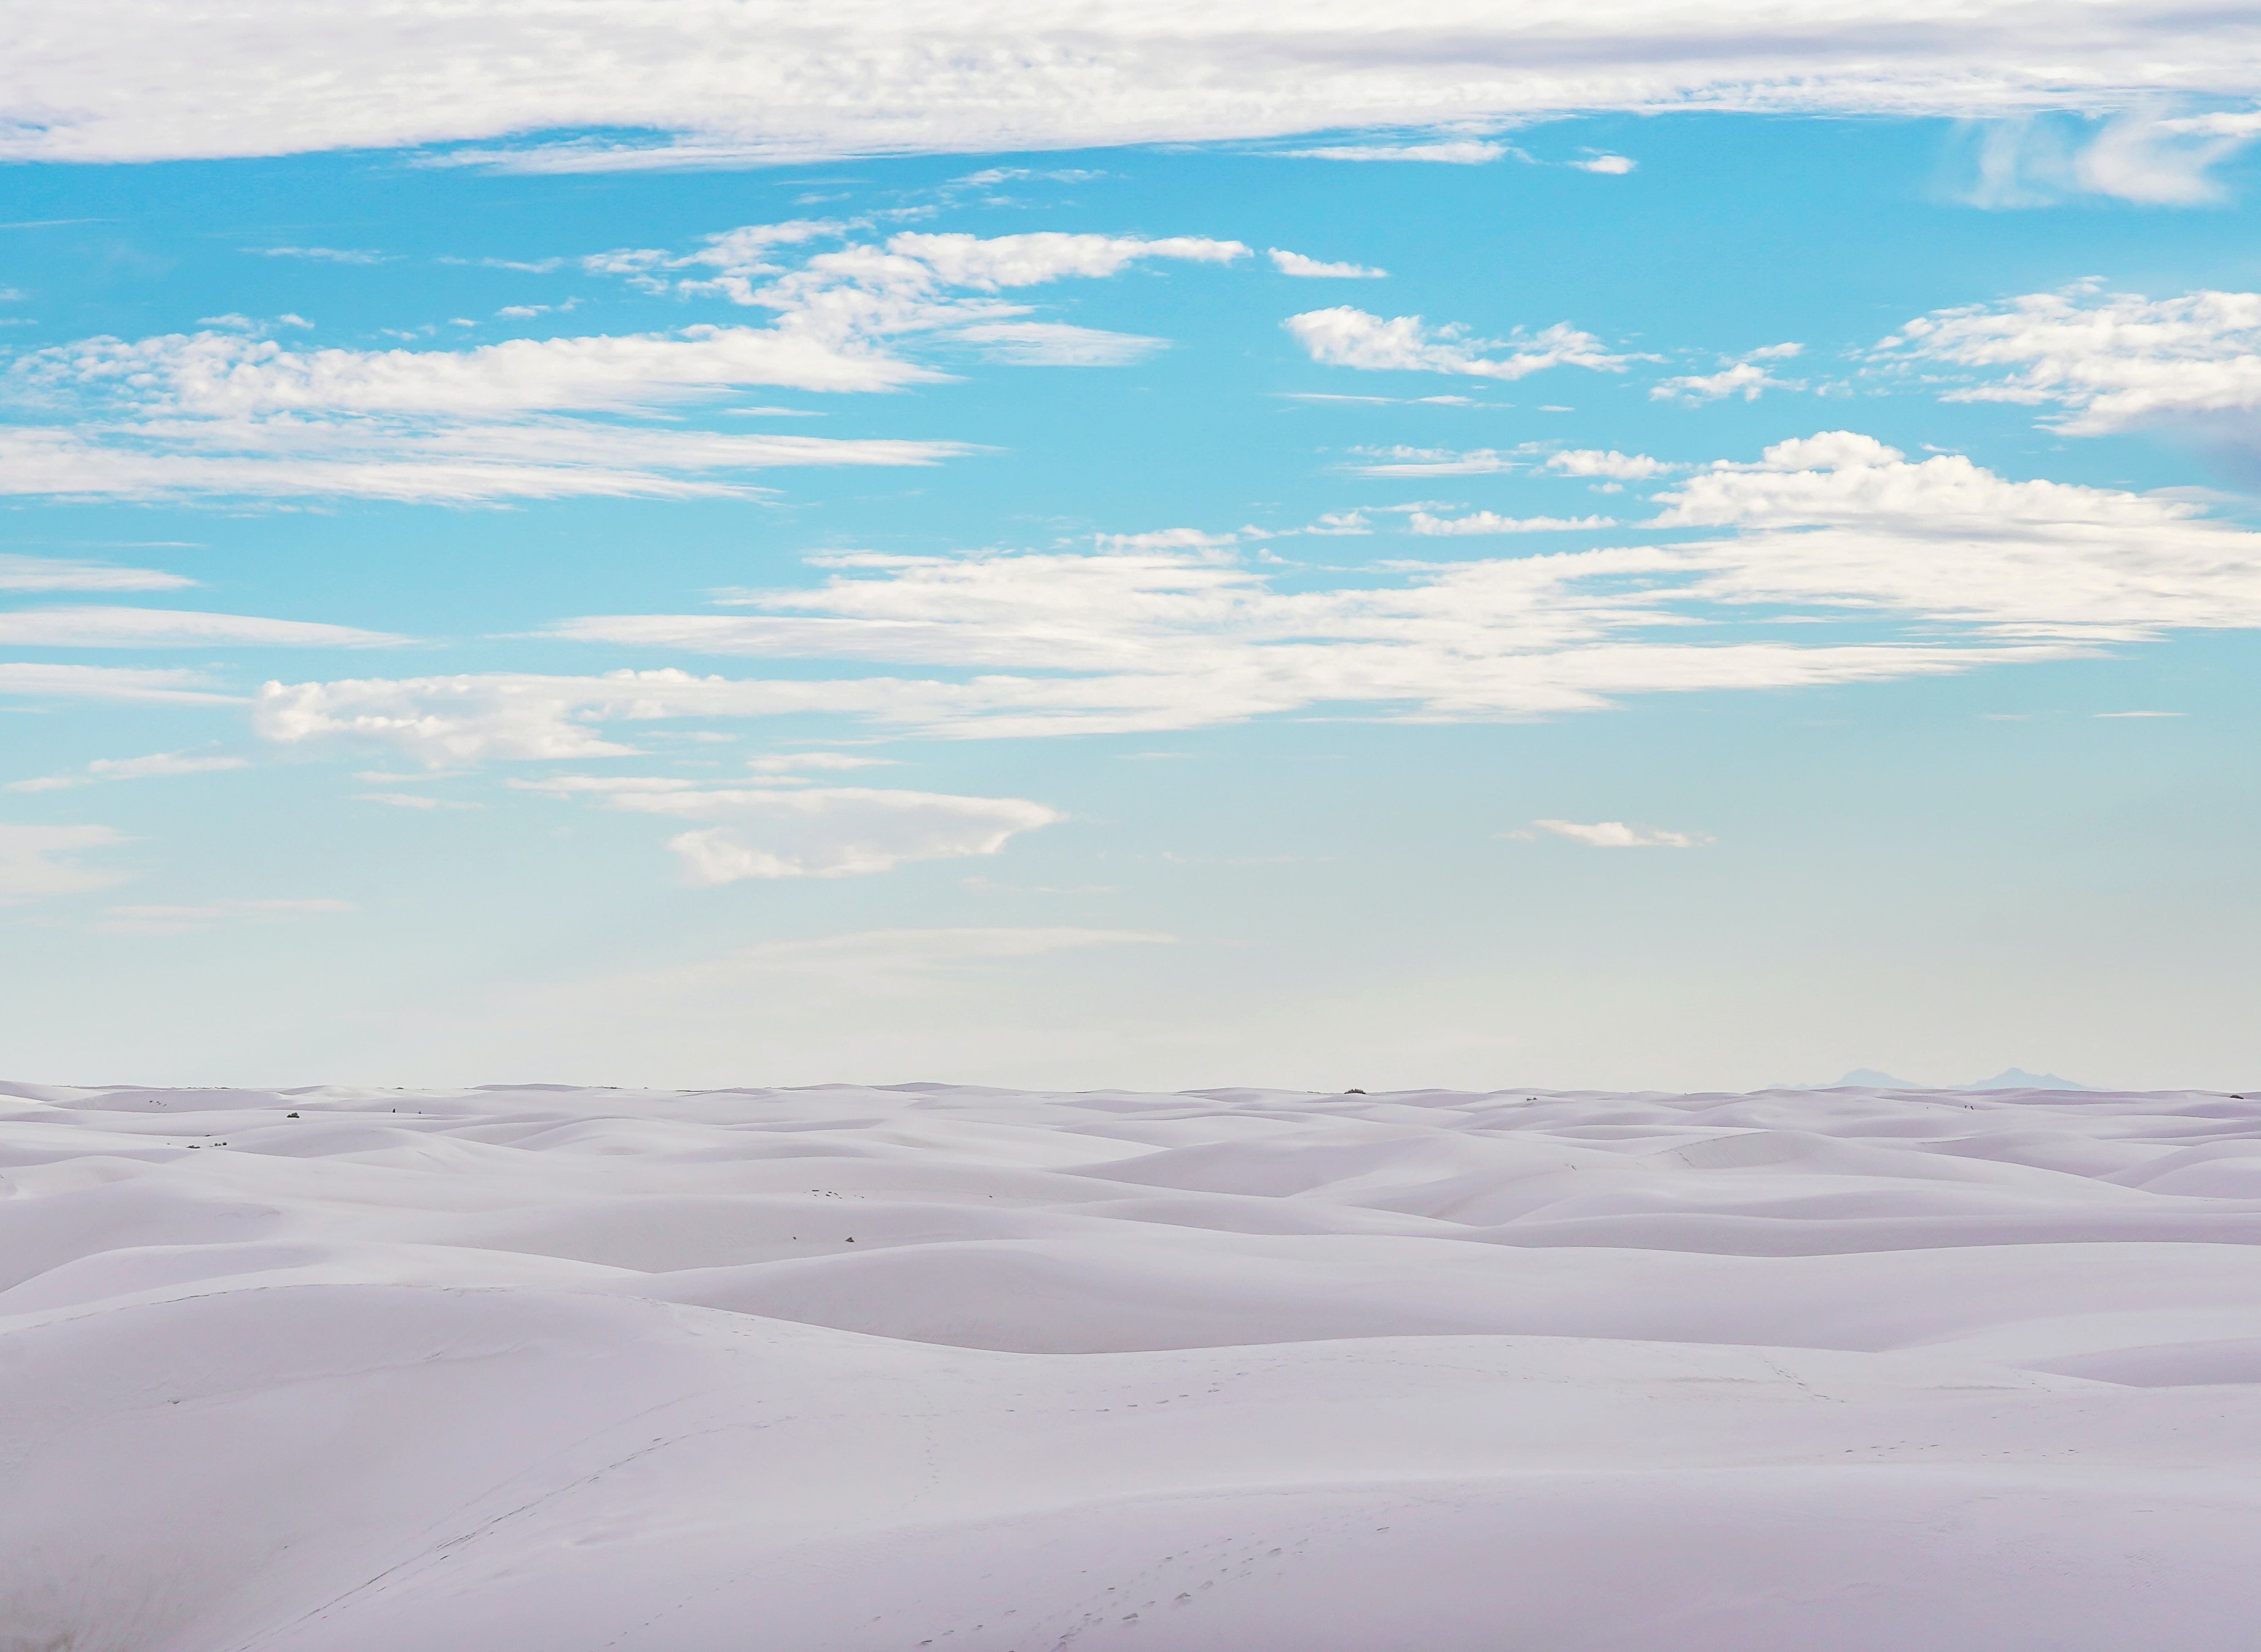 White sands under a bright blue sky in White Sands National Park